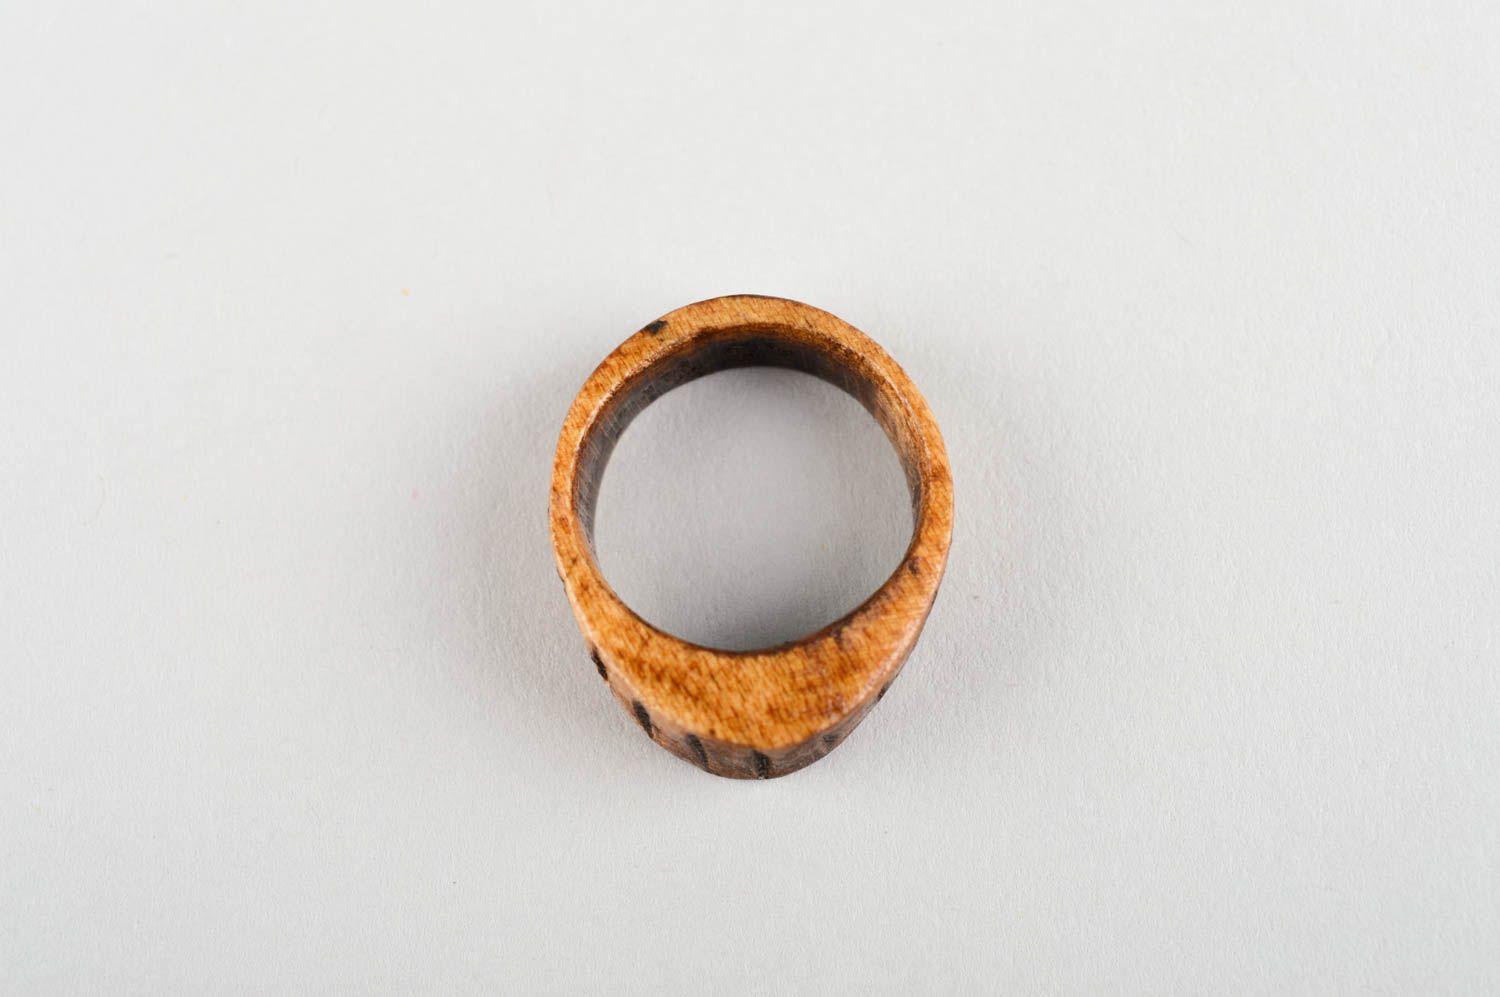 Unusual handmade wooden ring fashion accessories wood craft gifts for her photo 3